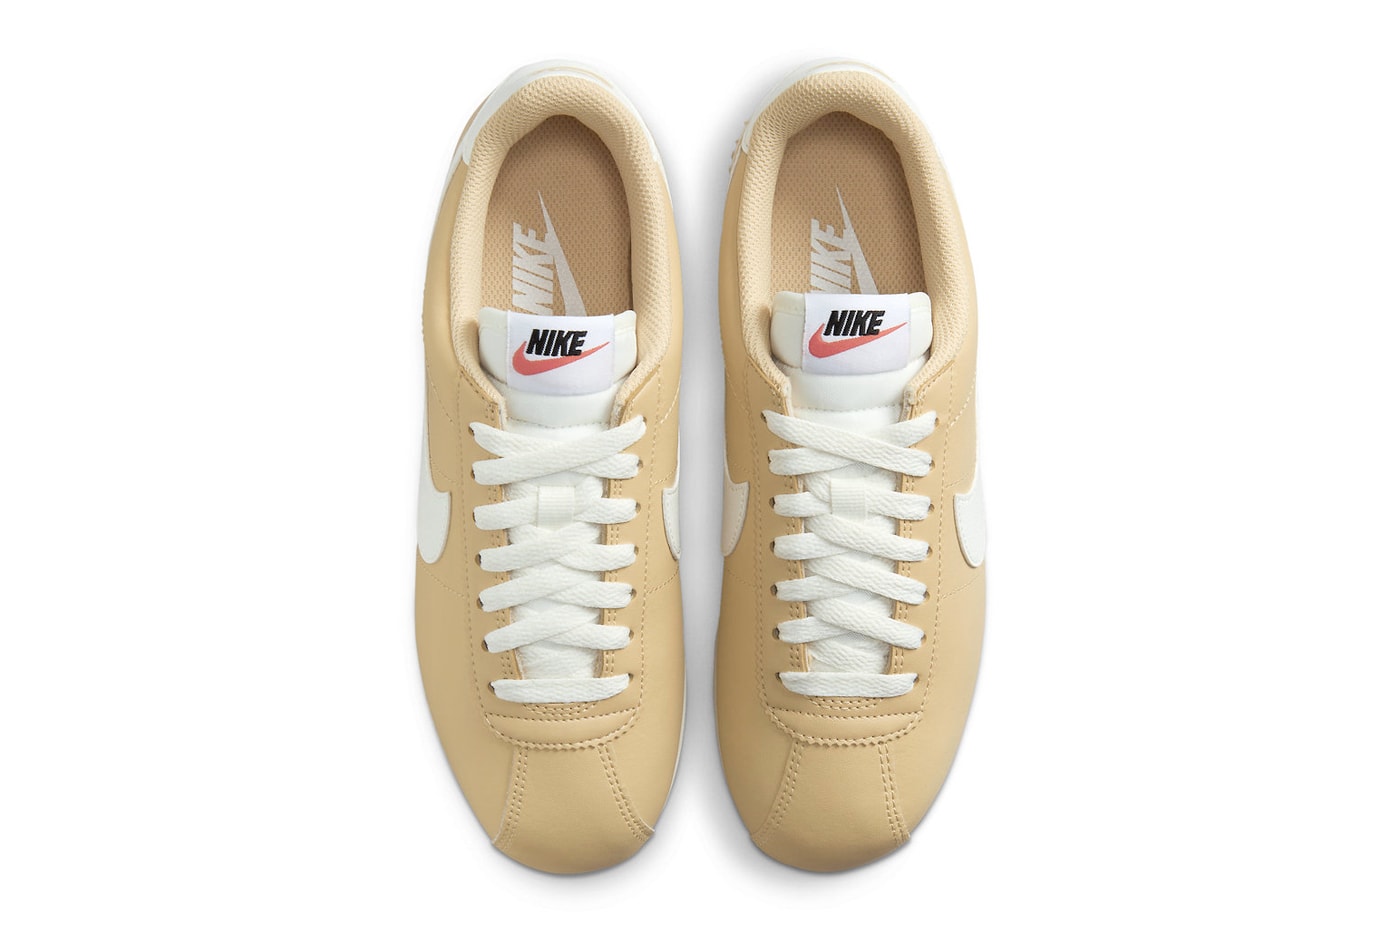 Official Look at the Nike Cortez "Sesame" swoosh nike vintage summer shoe sail white DN1791-200